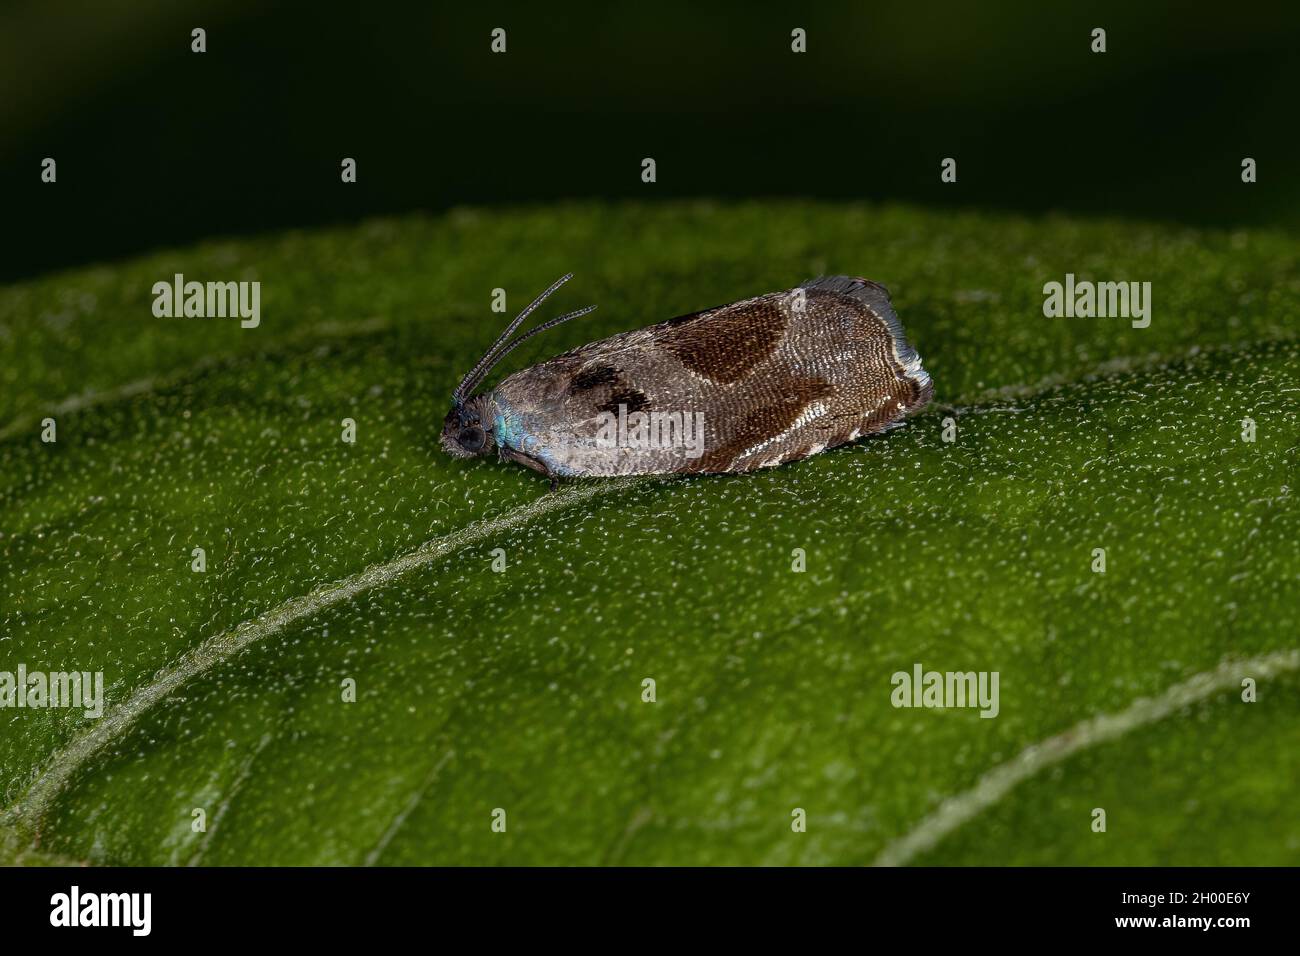 Adult Tortricid Leafroller Moth of the Family Tortricidae Stock Photo